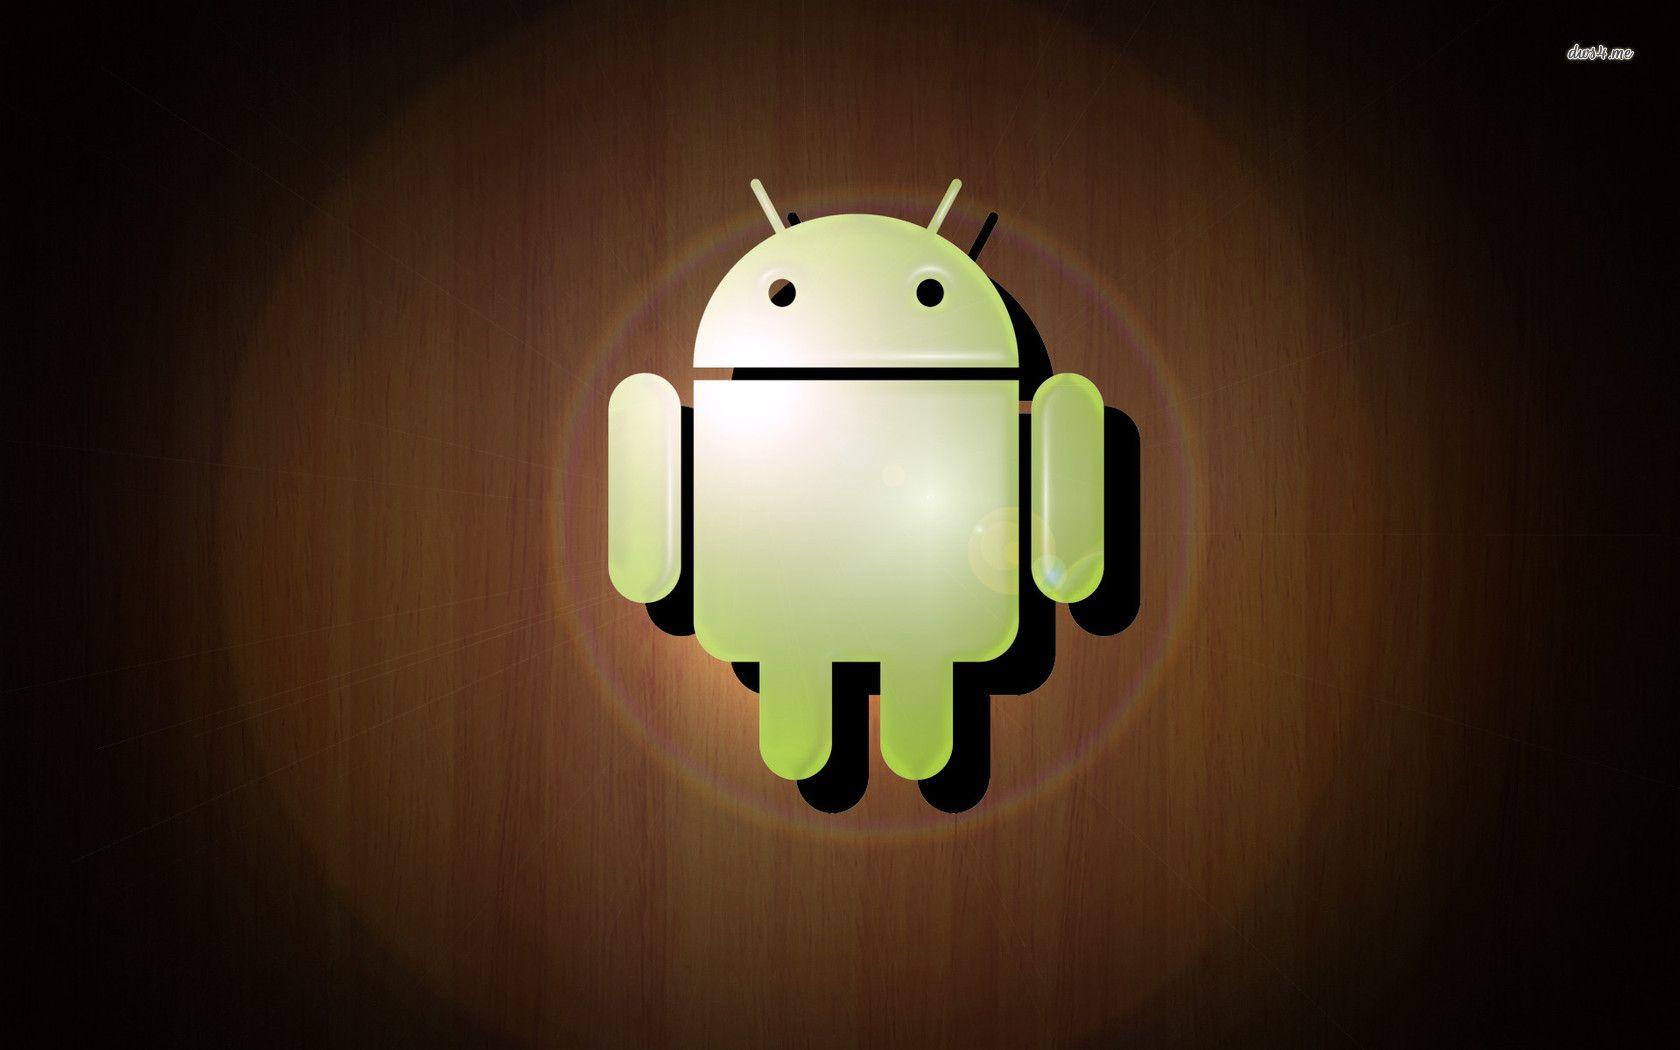 Android logo on wooden texture wallpaper wallpaper - #